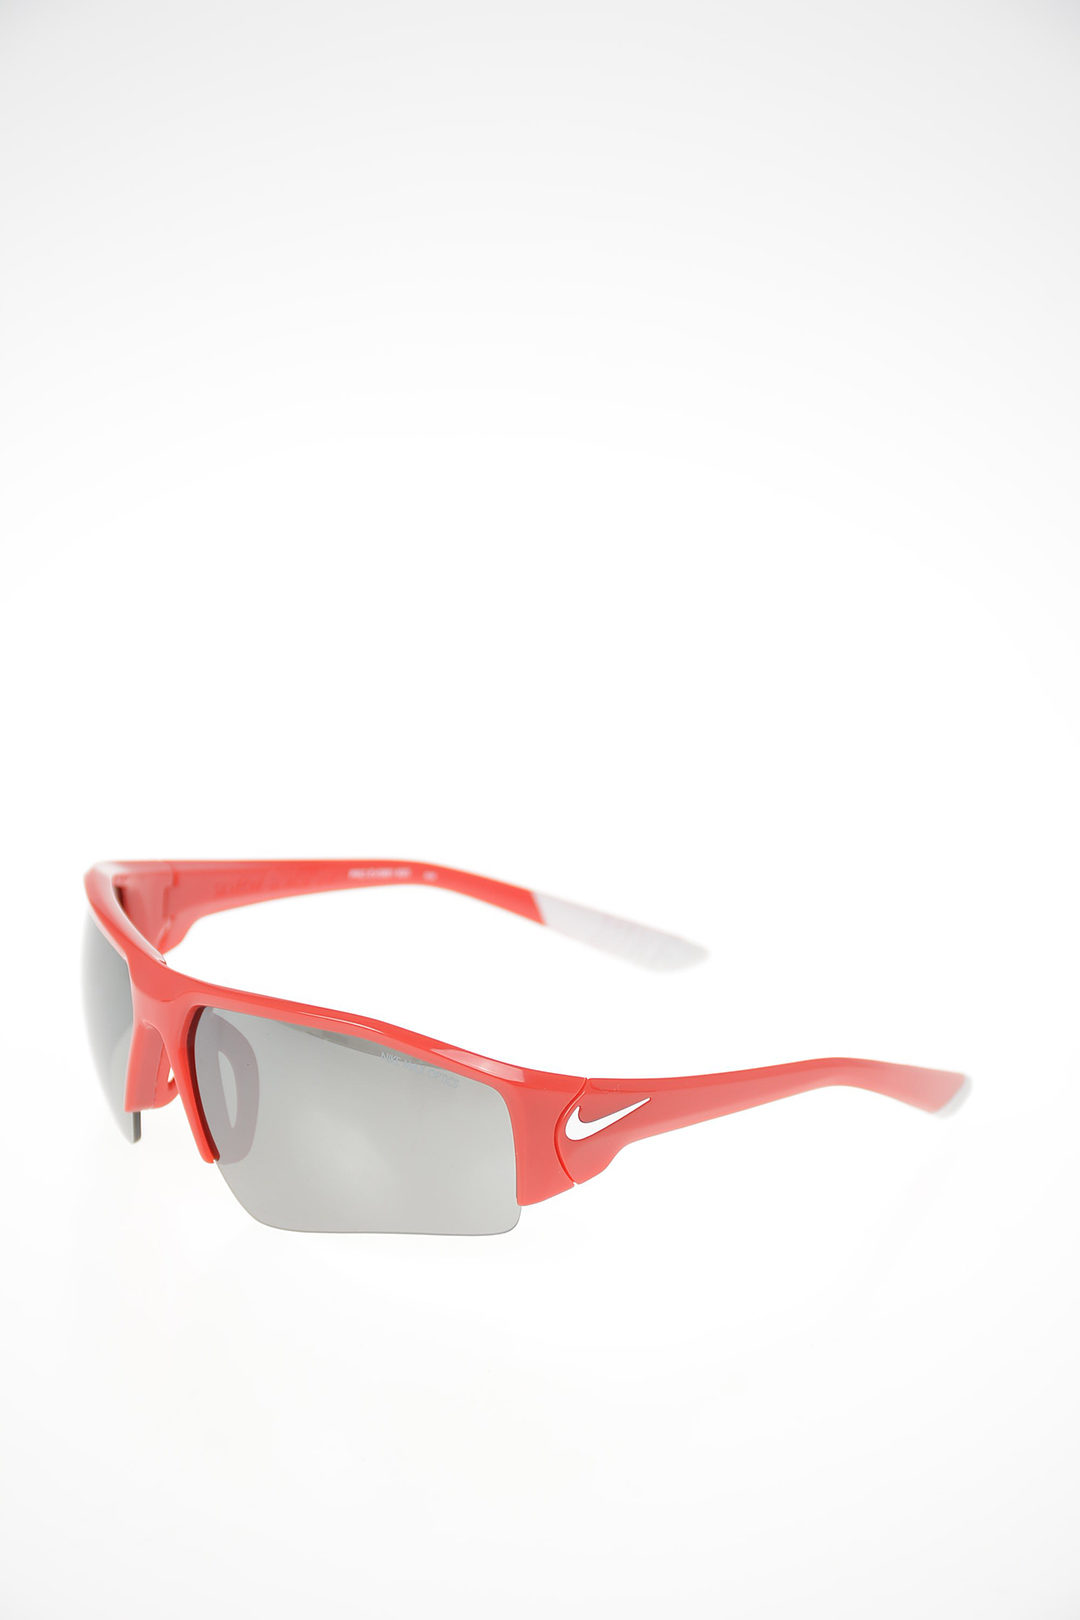 nike outlet sunglasses